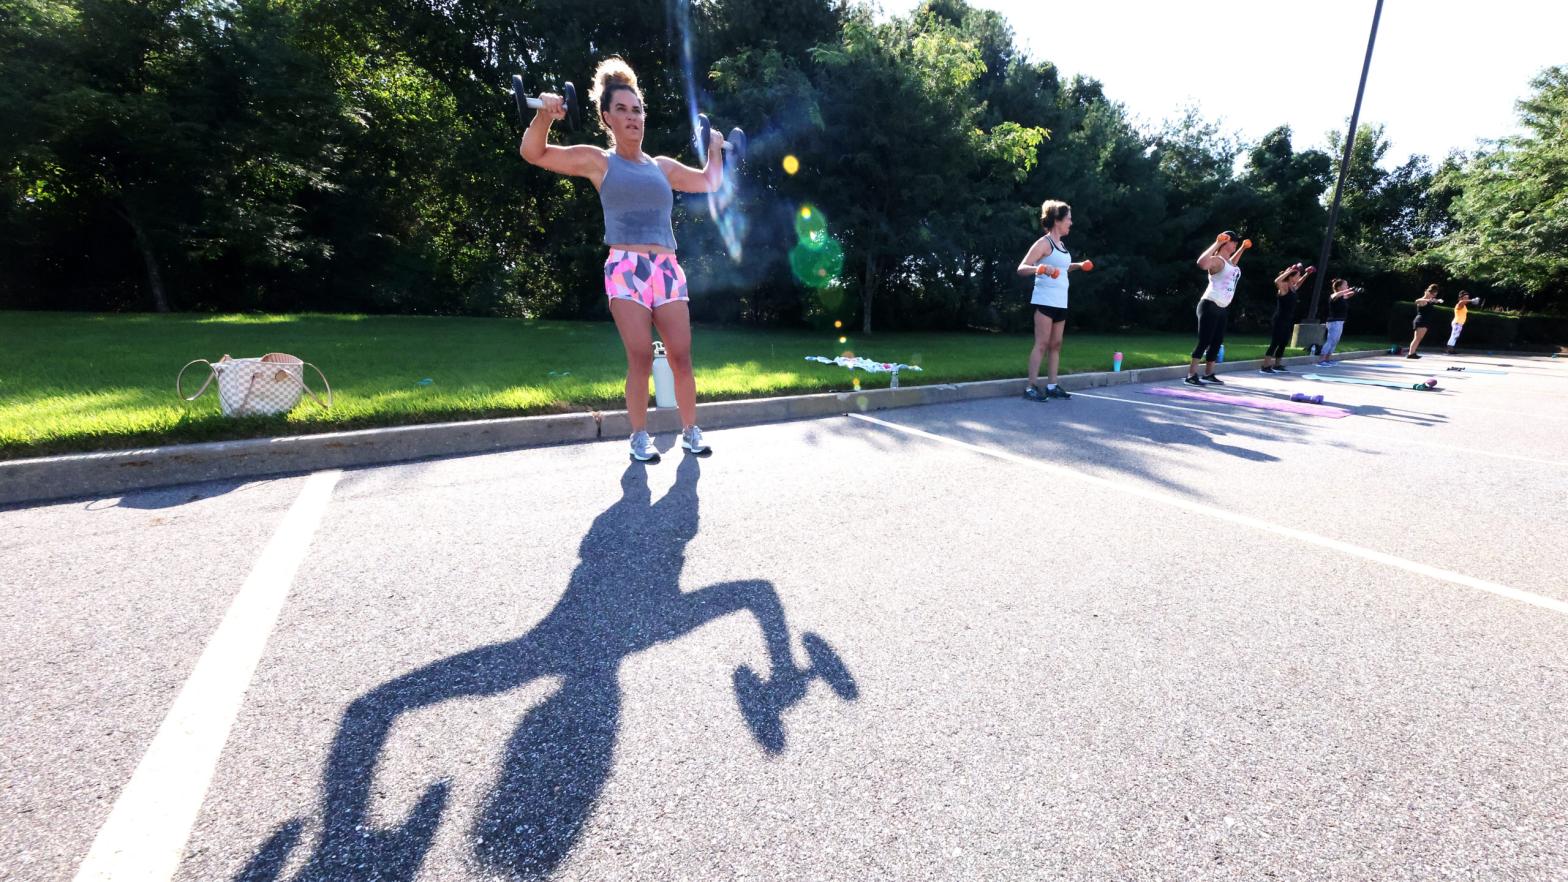 People exercising in an outdoor class on August 24, 2020 in Islip, New York. (Photo: Al Bello, Getty Images)